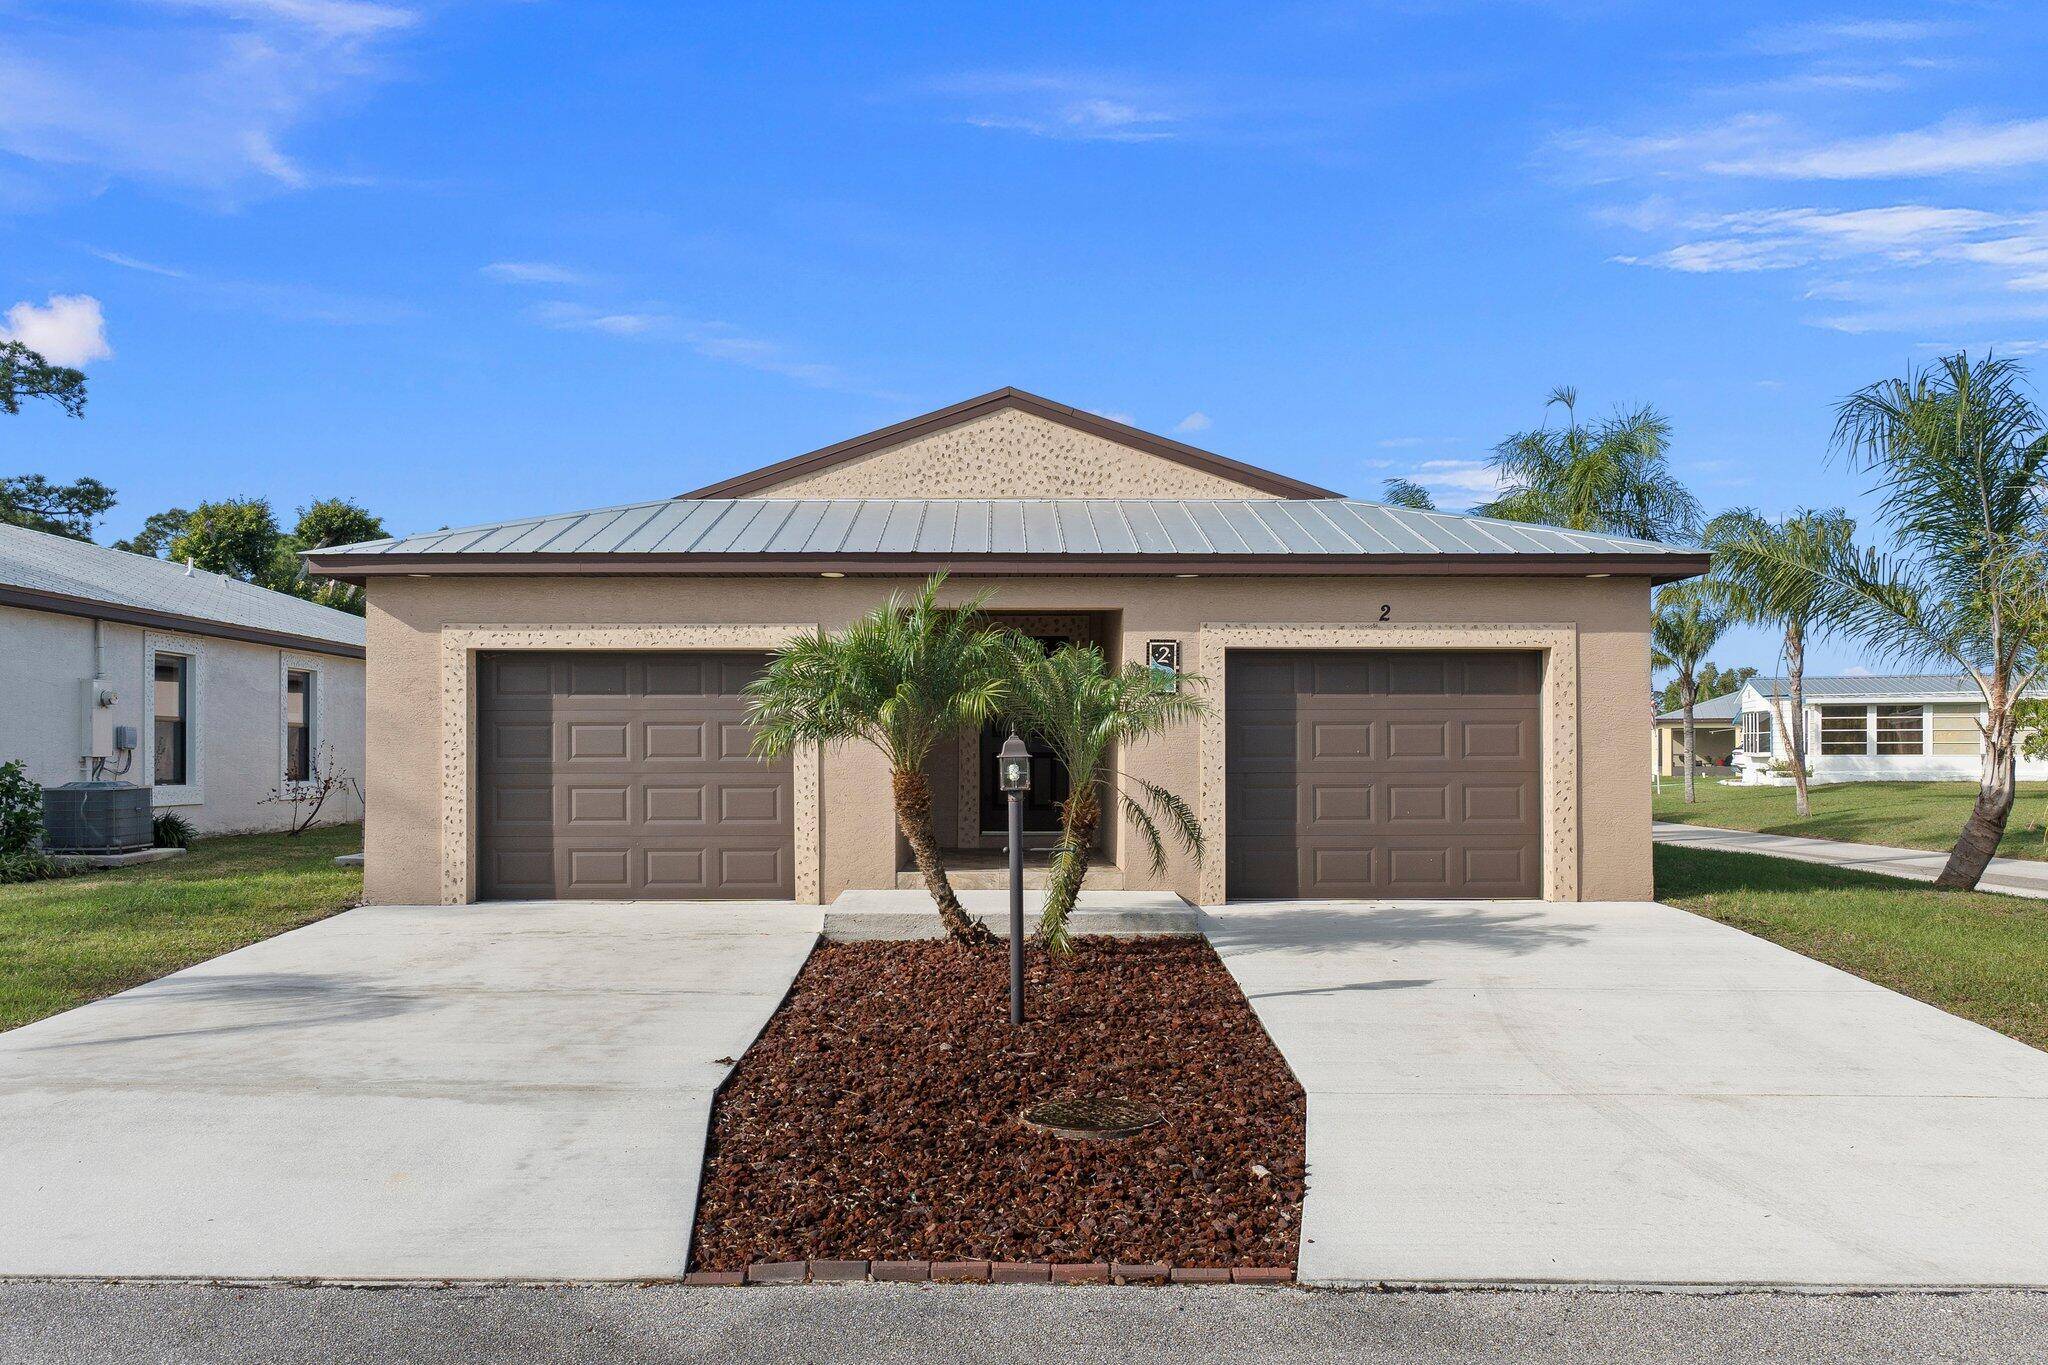 Discover the epitome of comfortable living in this 2019 CBS house nestled within an active 55 community.